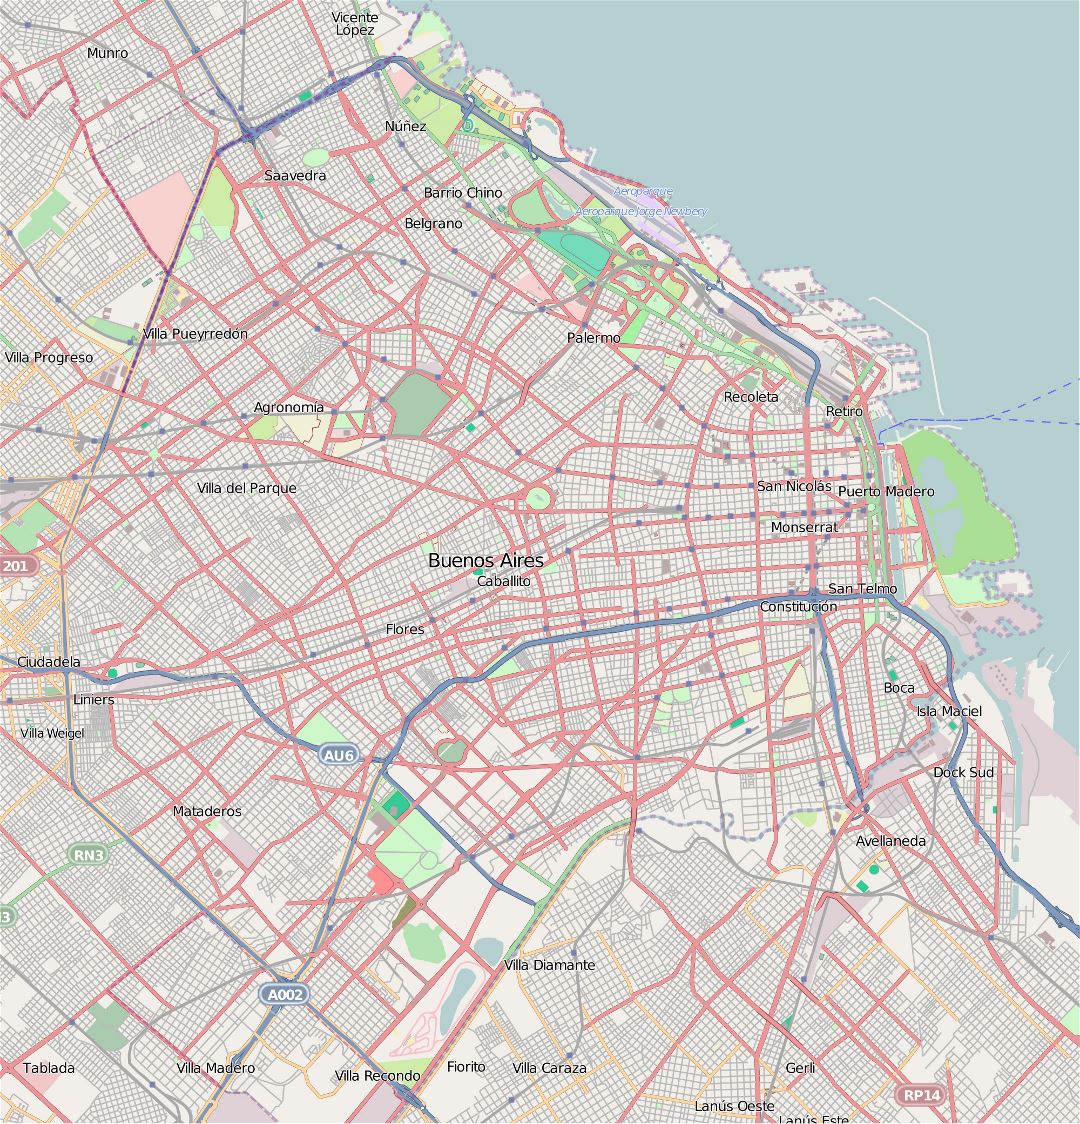 Detailed road map of Buenos Aires